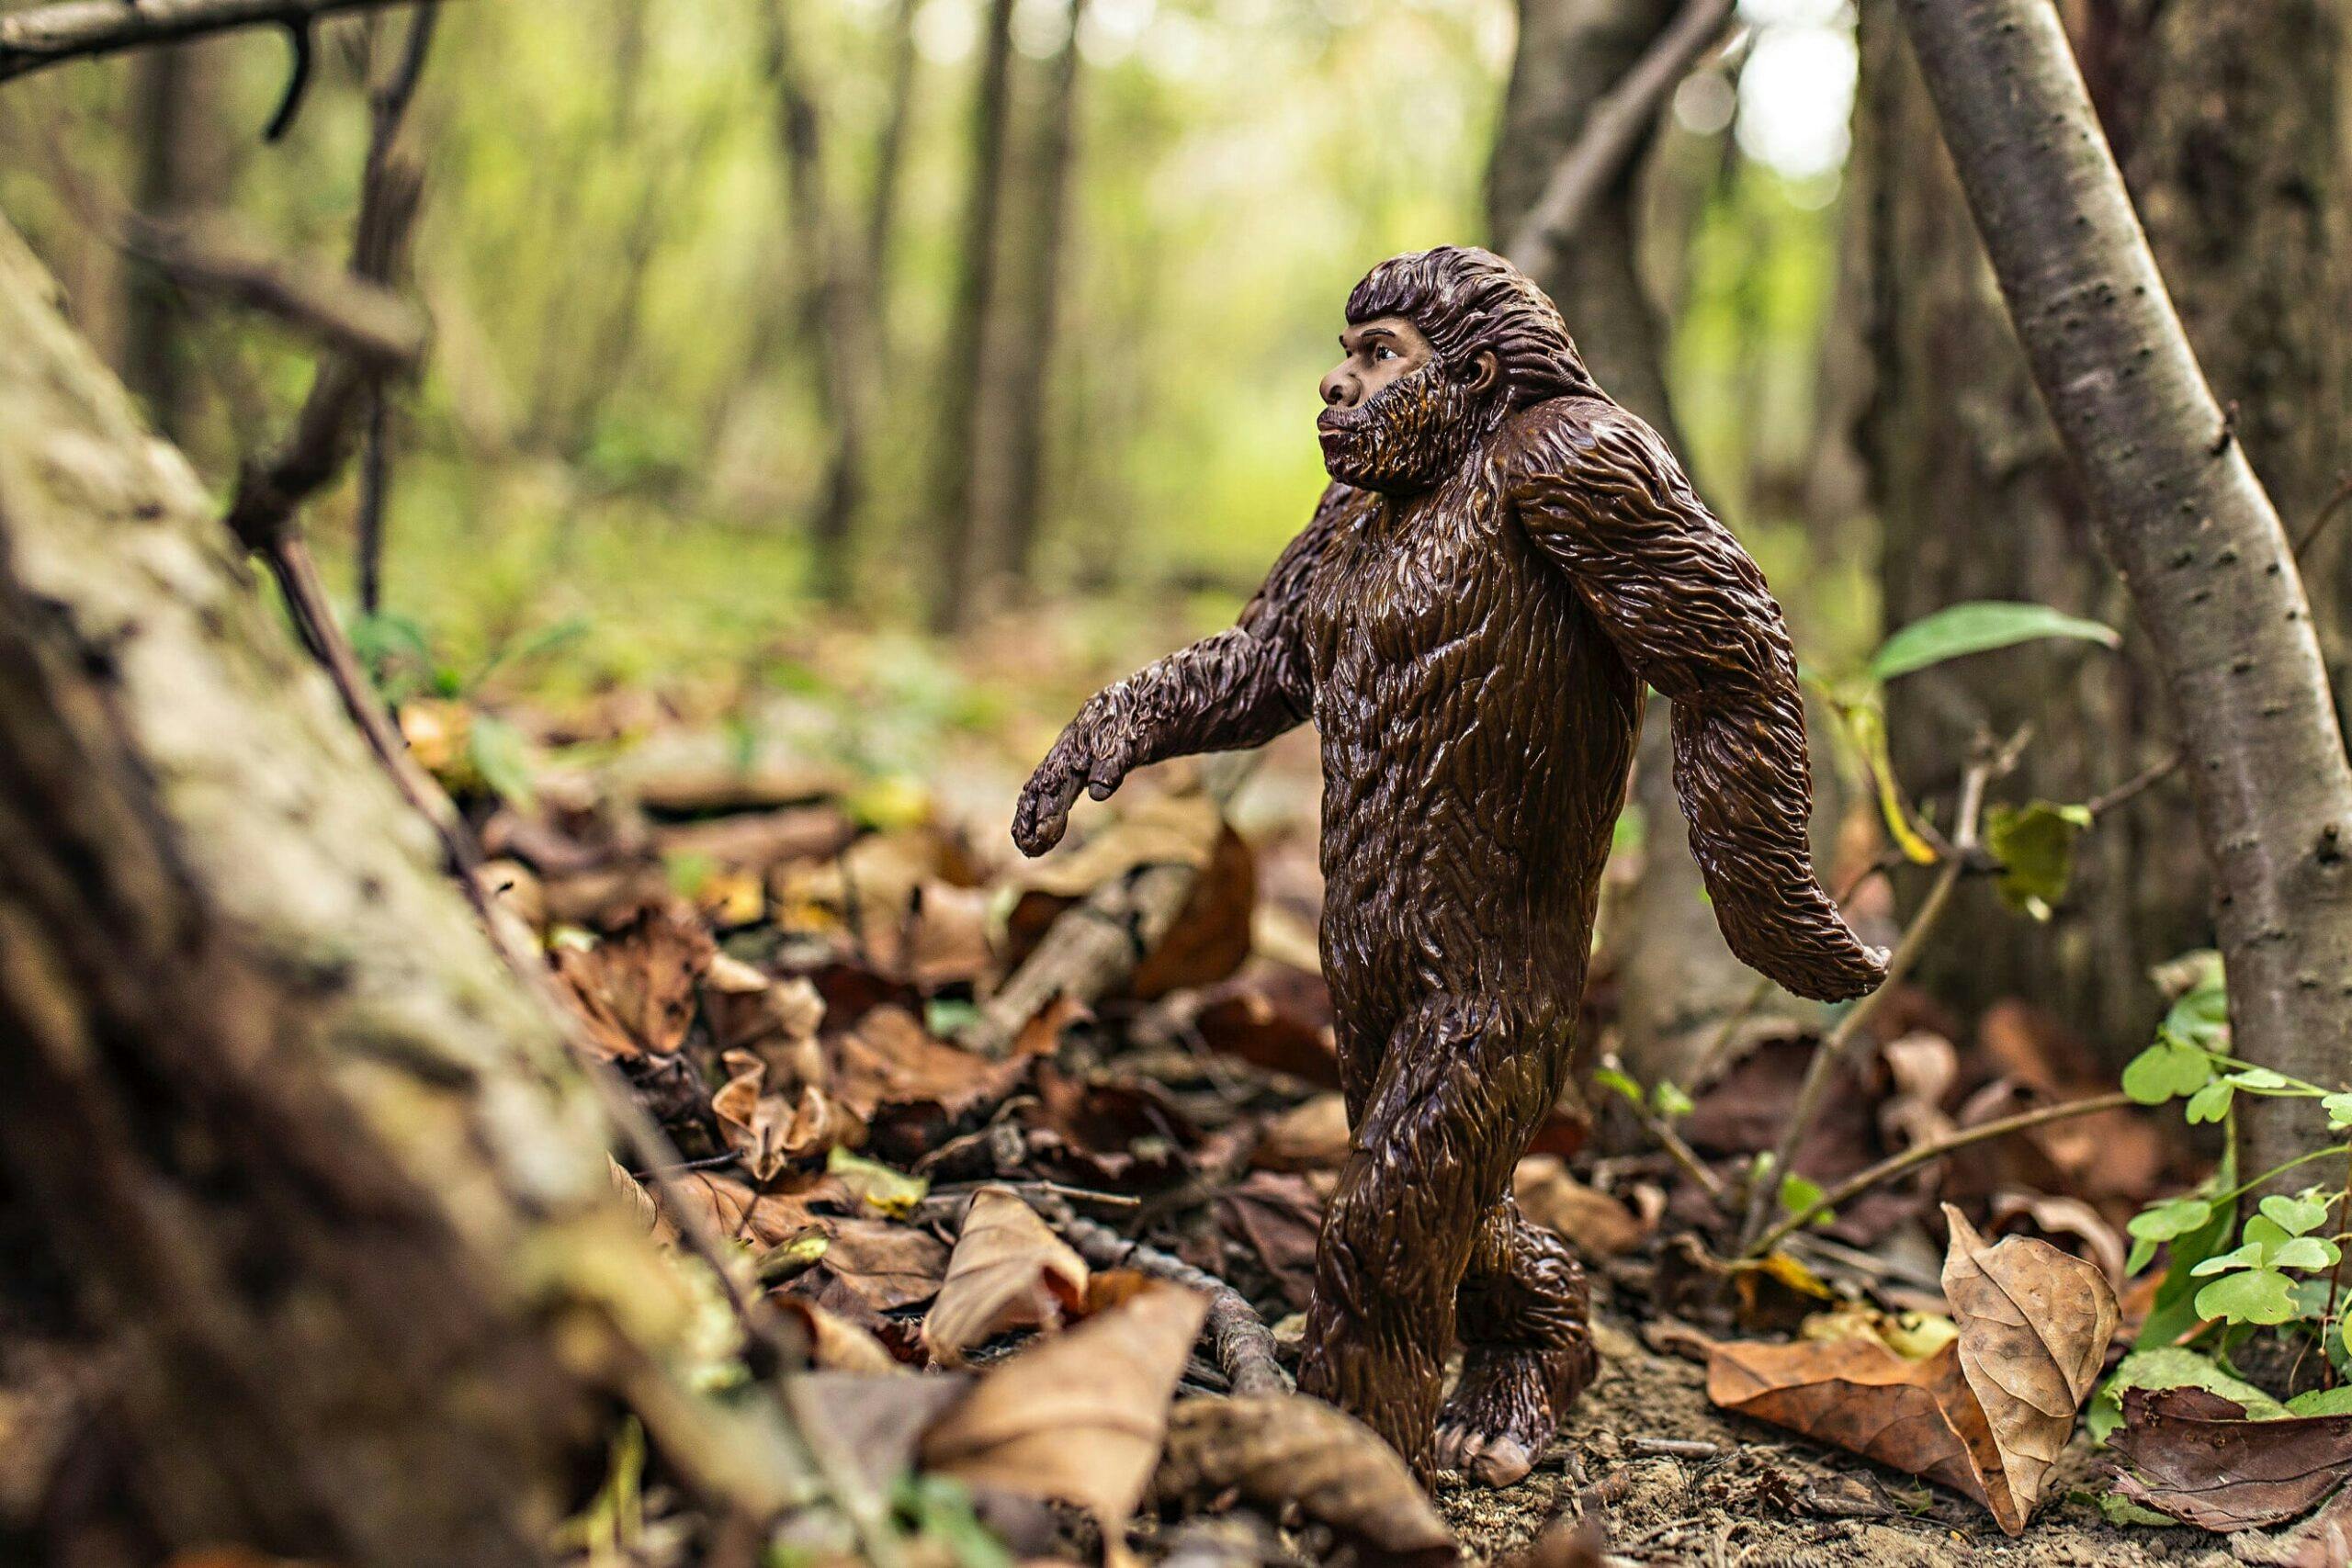 GOP candidate called out for posting Bigfoot erotica